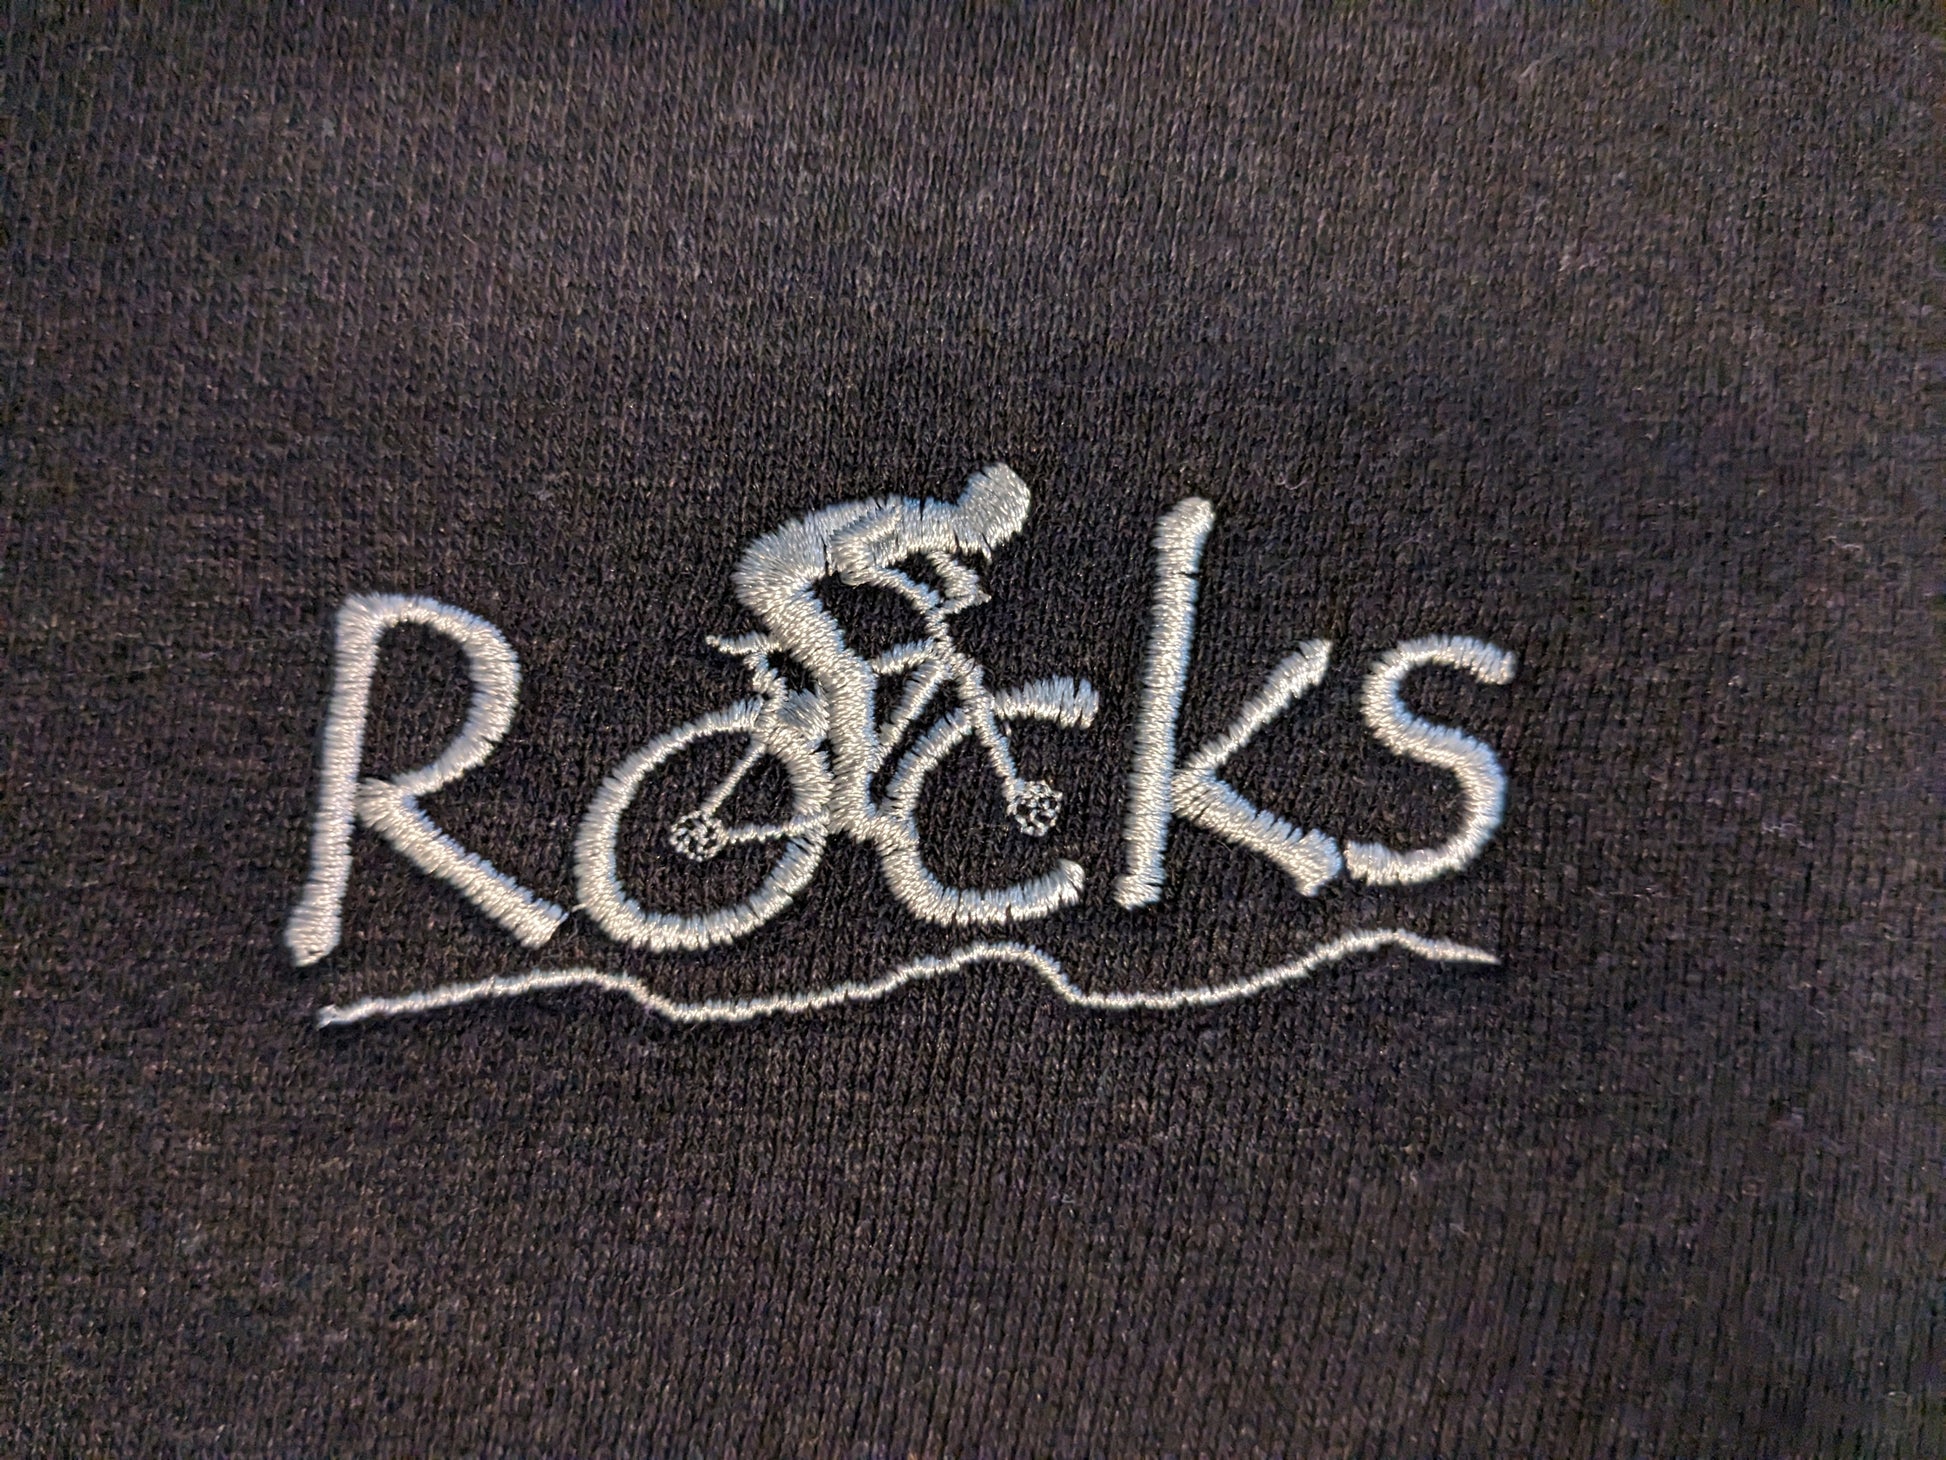 close up of embroidery on Rocks Hemp Fleece Track Jacket - Men's sizing. The embroidery spells Roads with 'oc' tires of bike with cyclist. Embroidery colour=silver light grey